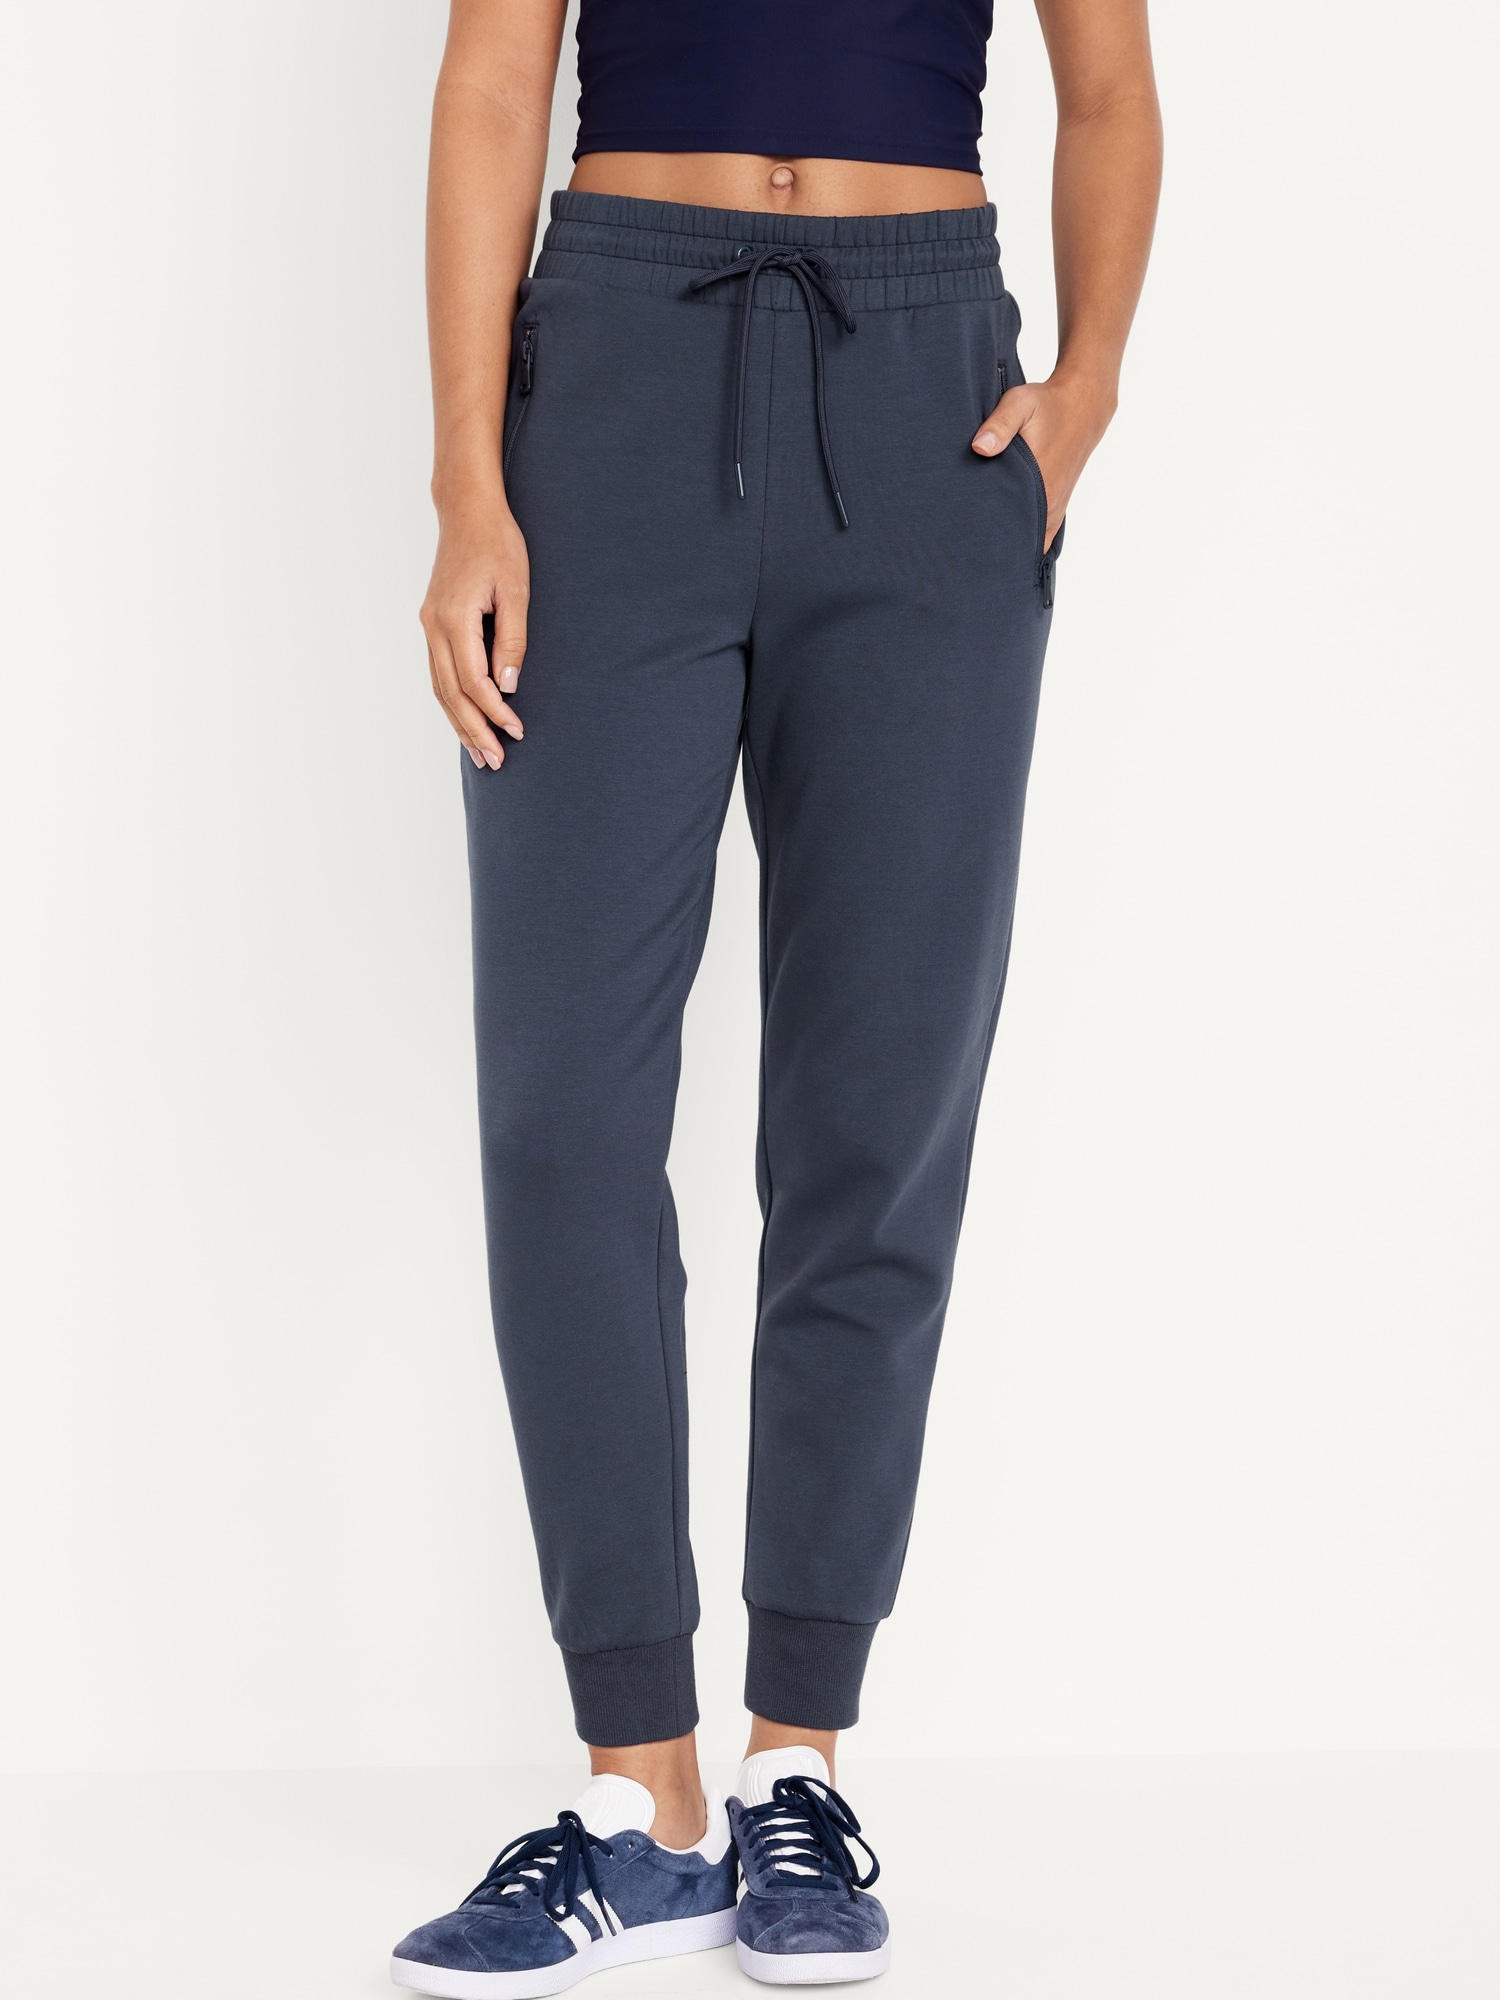 Old Navy Slim High-Waisted Dynamic Fleece Joggers for Girls